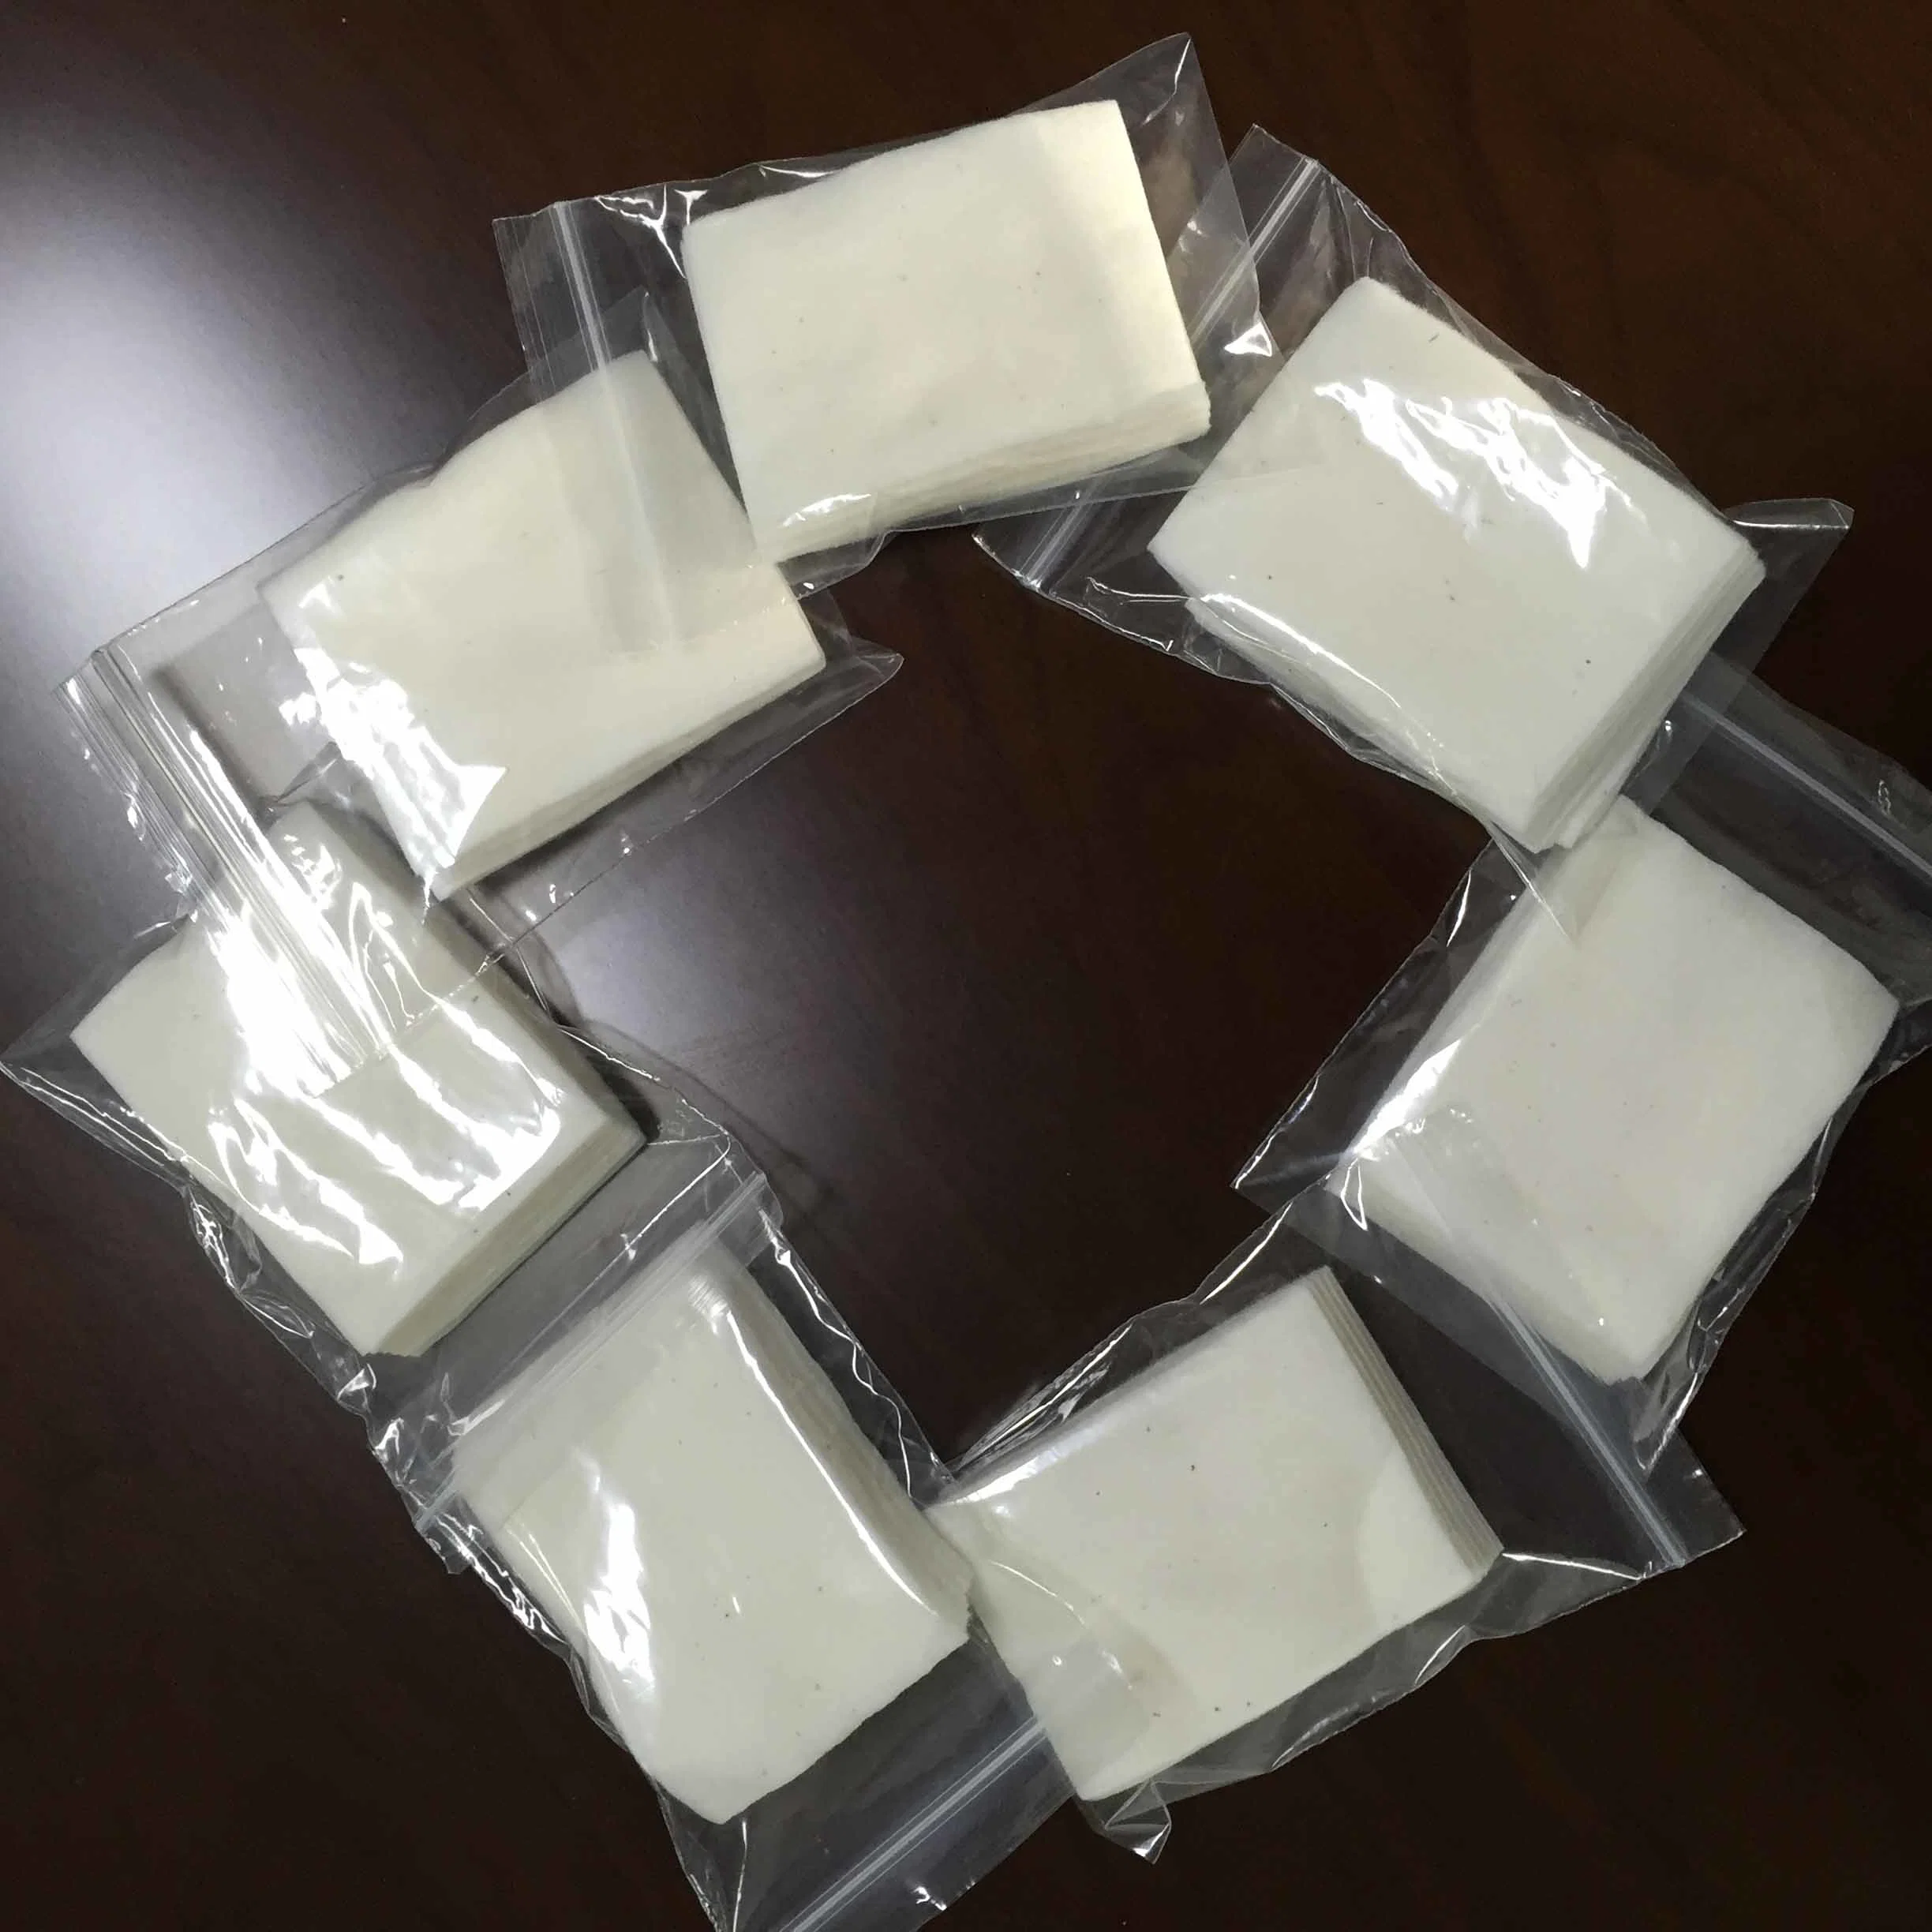 Cotton for E Cig Coil Supplier From China